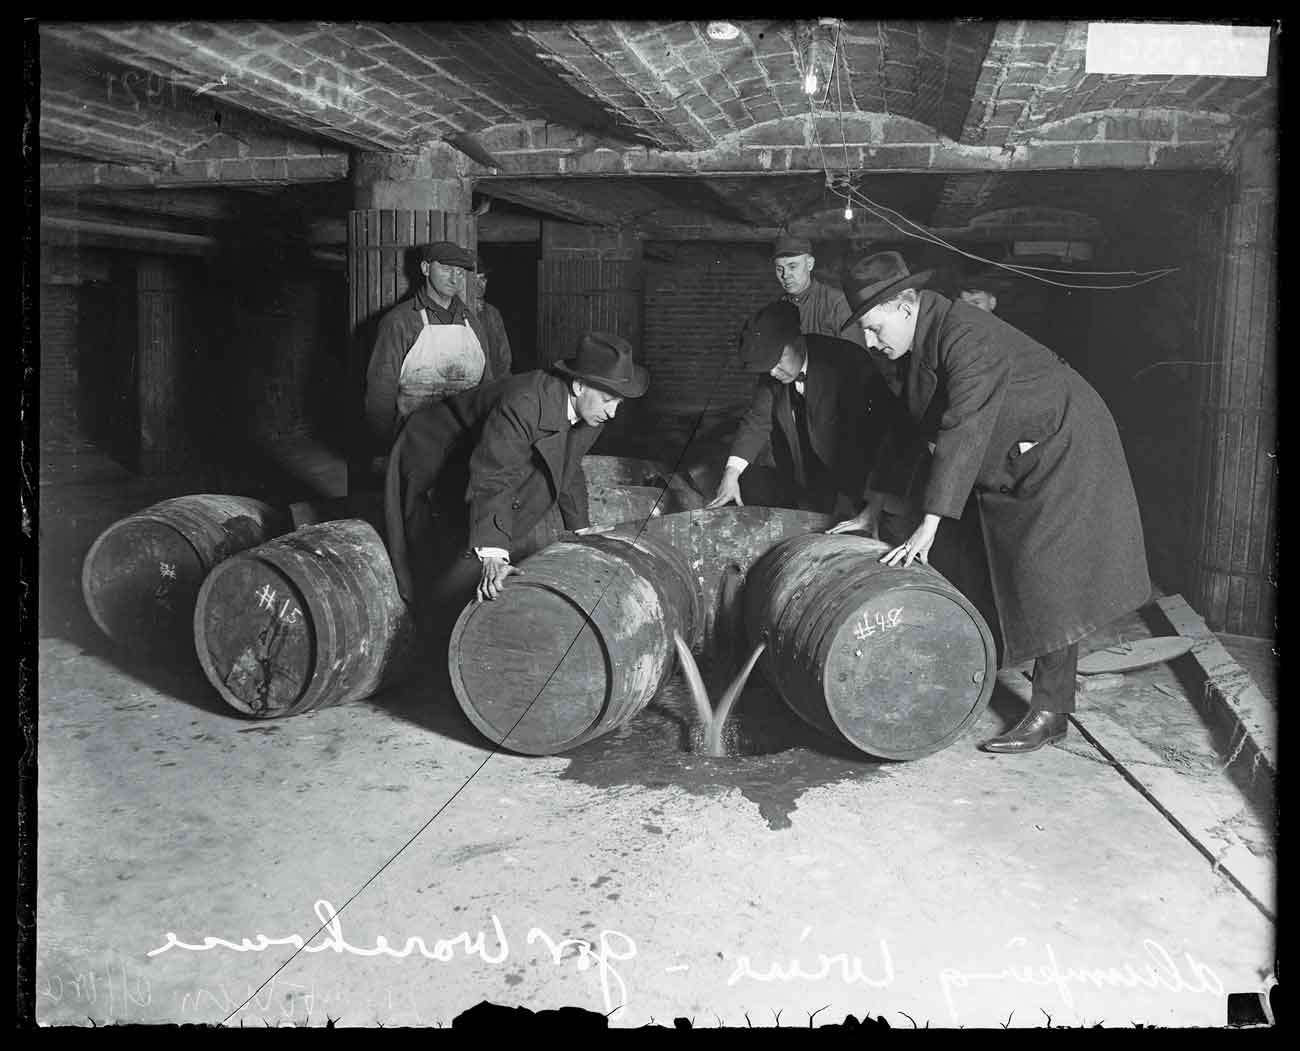 A group of men dump wine from barrels into a drain in Chicago in 1921 during Prohibition.